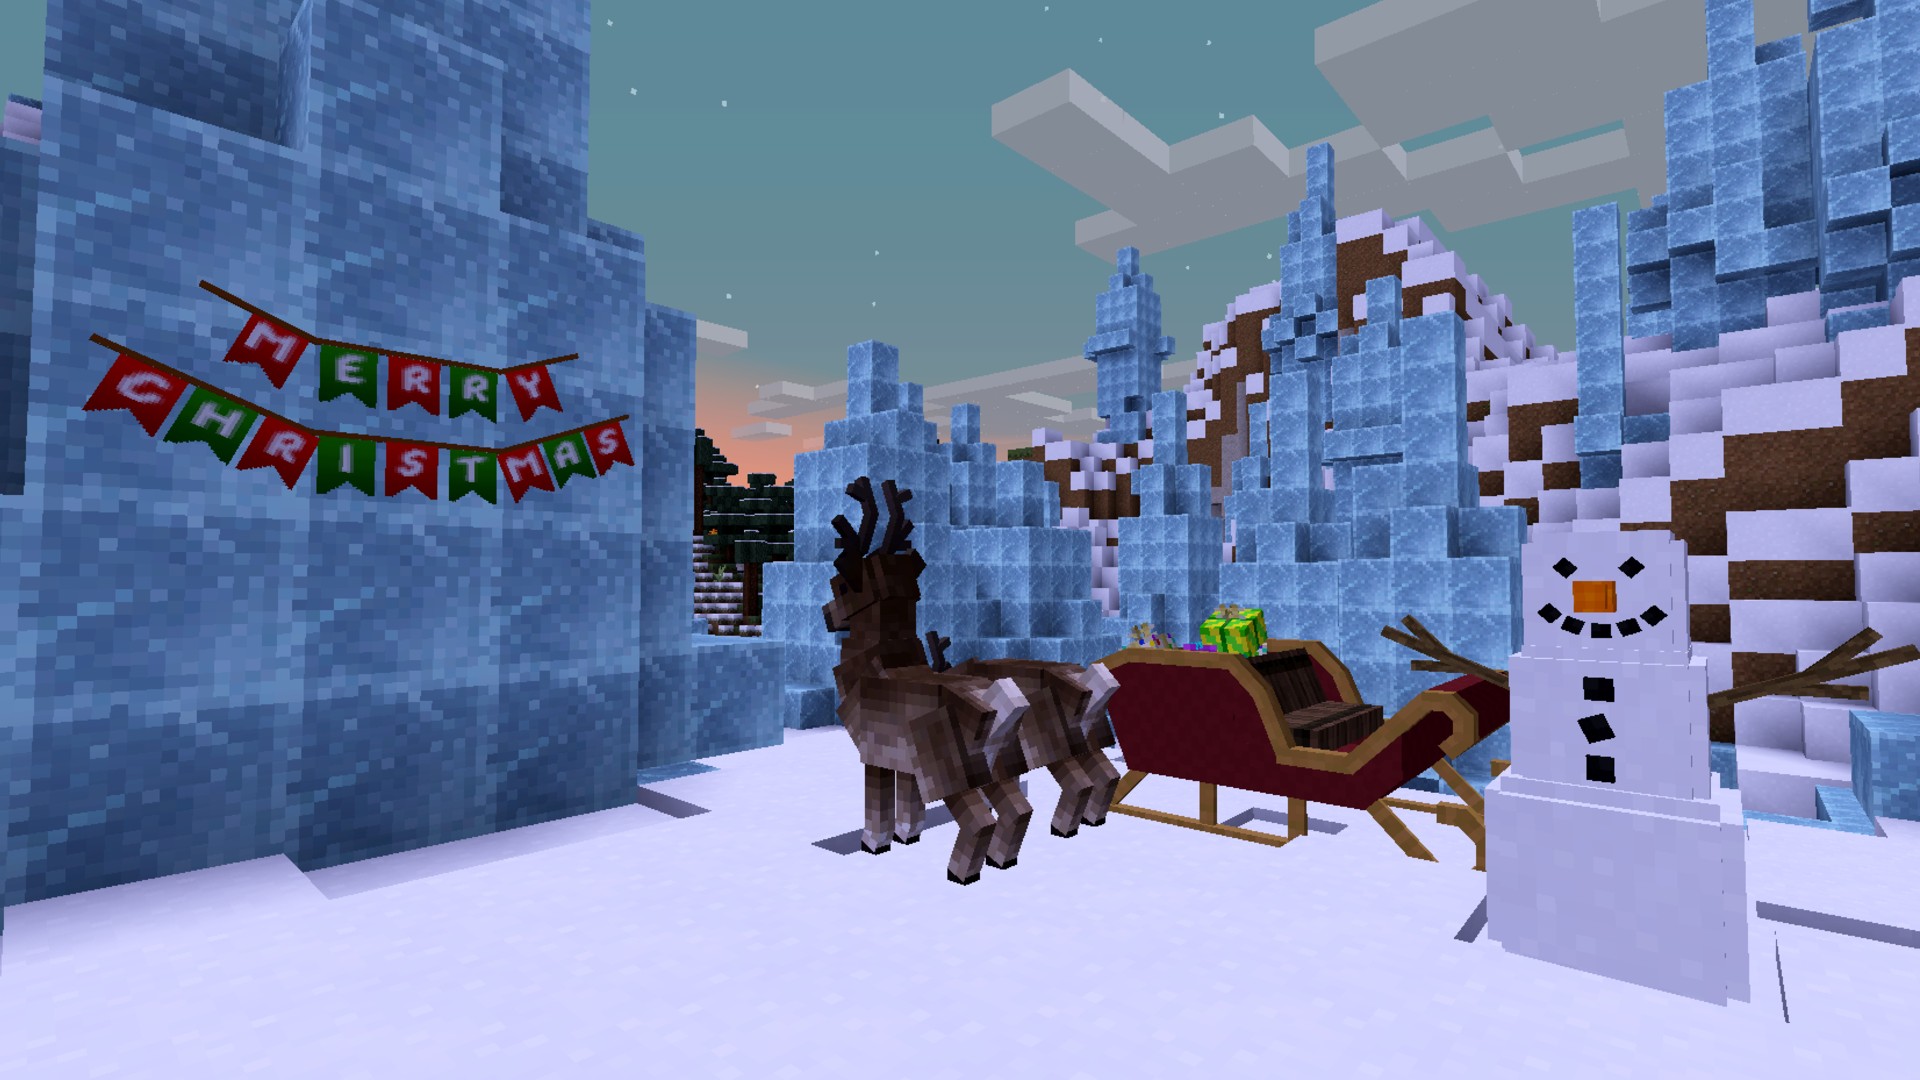 The perfect Minecraft Christmas builds, seeds, skins, and extra